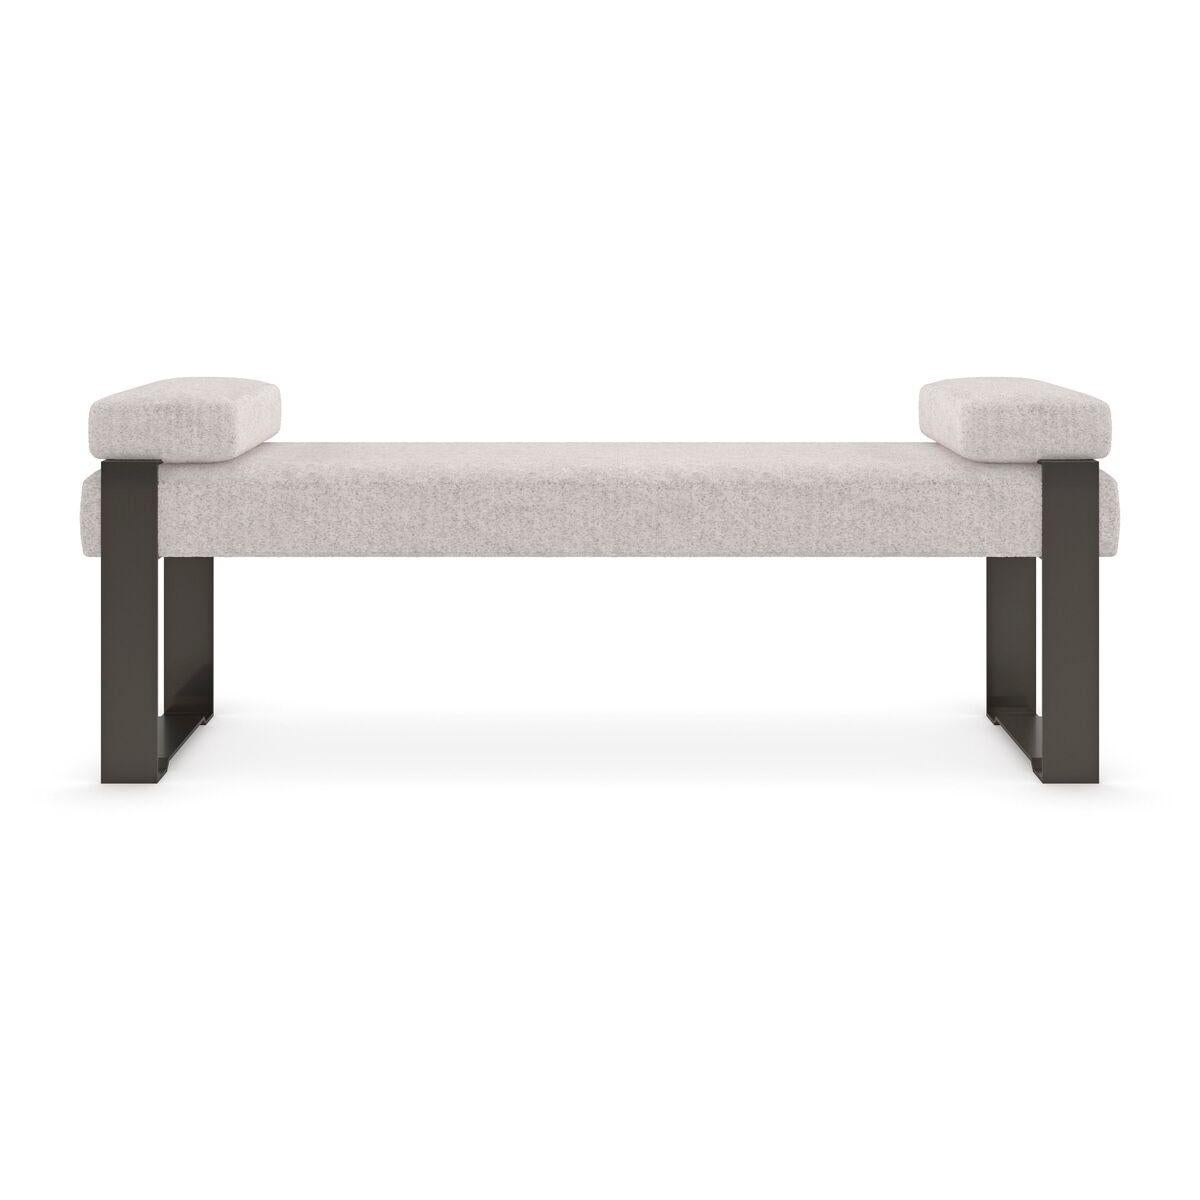 With an architecturally inspired frame, this streamlined bench juxtaposes the industrial aesthetic of Brushed Deep Bronze metal and a plush taupe velvet. With embedded magnets to keep them in place, side pillows add comfort and keep the look clean.